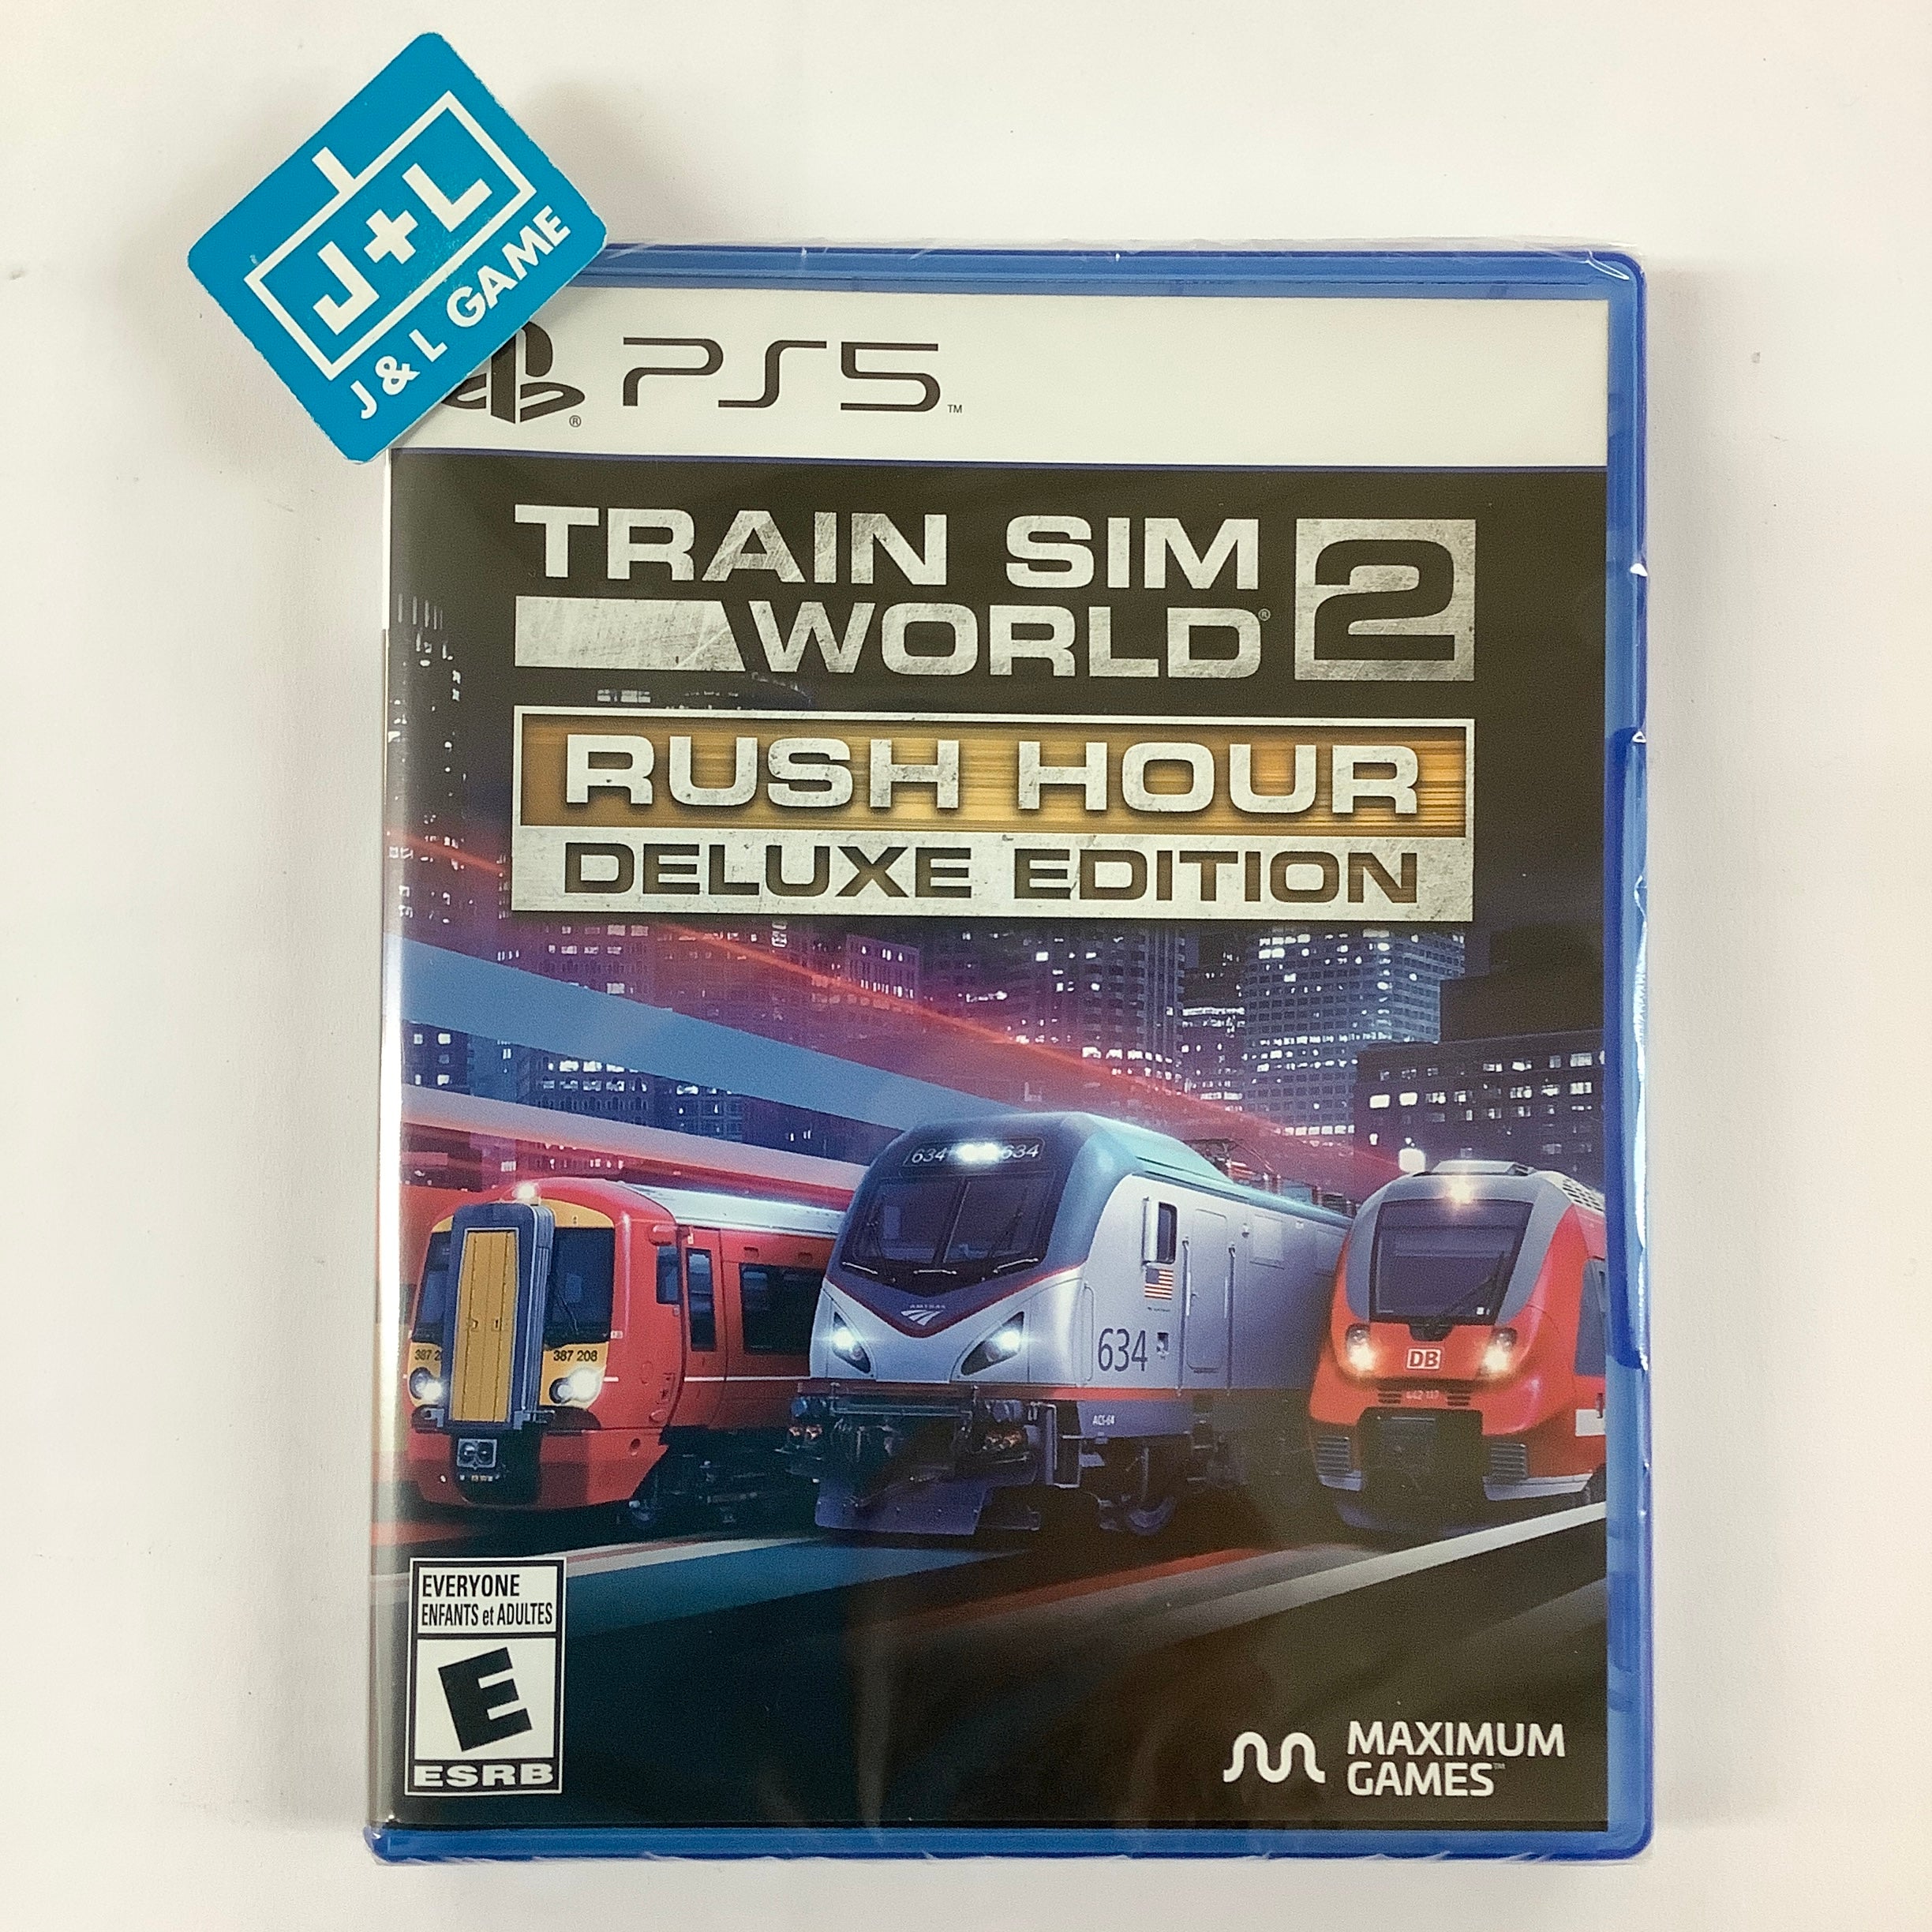 Train Sim World 2: Rush Hour Deluxe Edition - (PS5) PlayStation 5 Video Games Maximum Games   